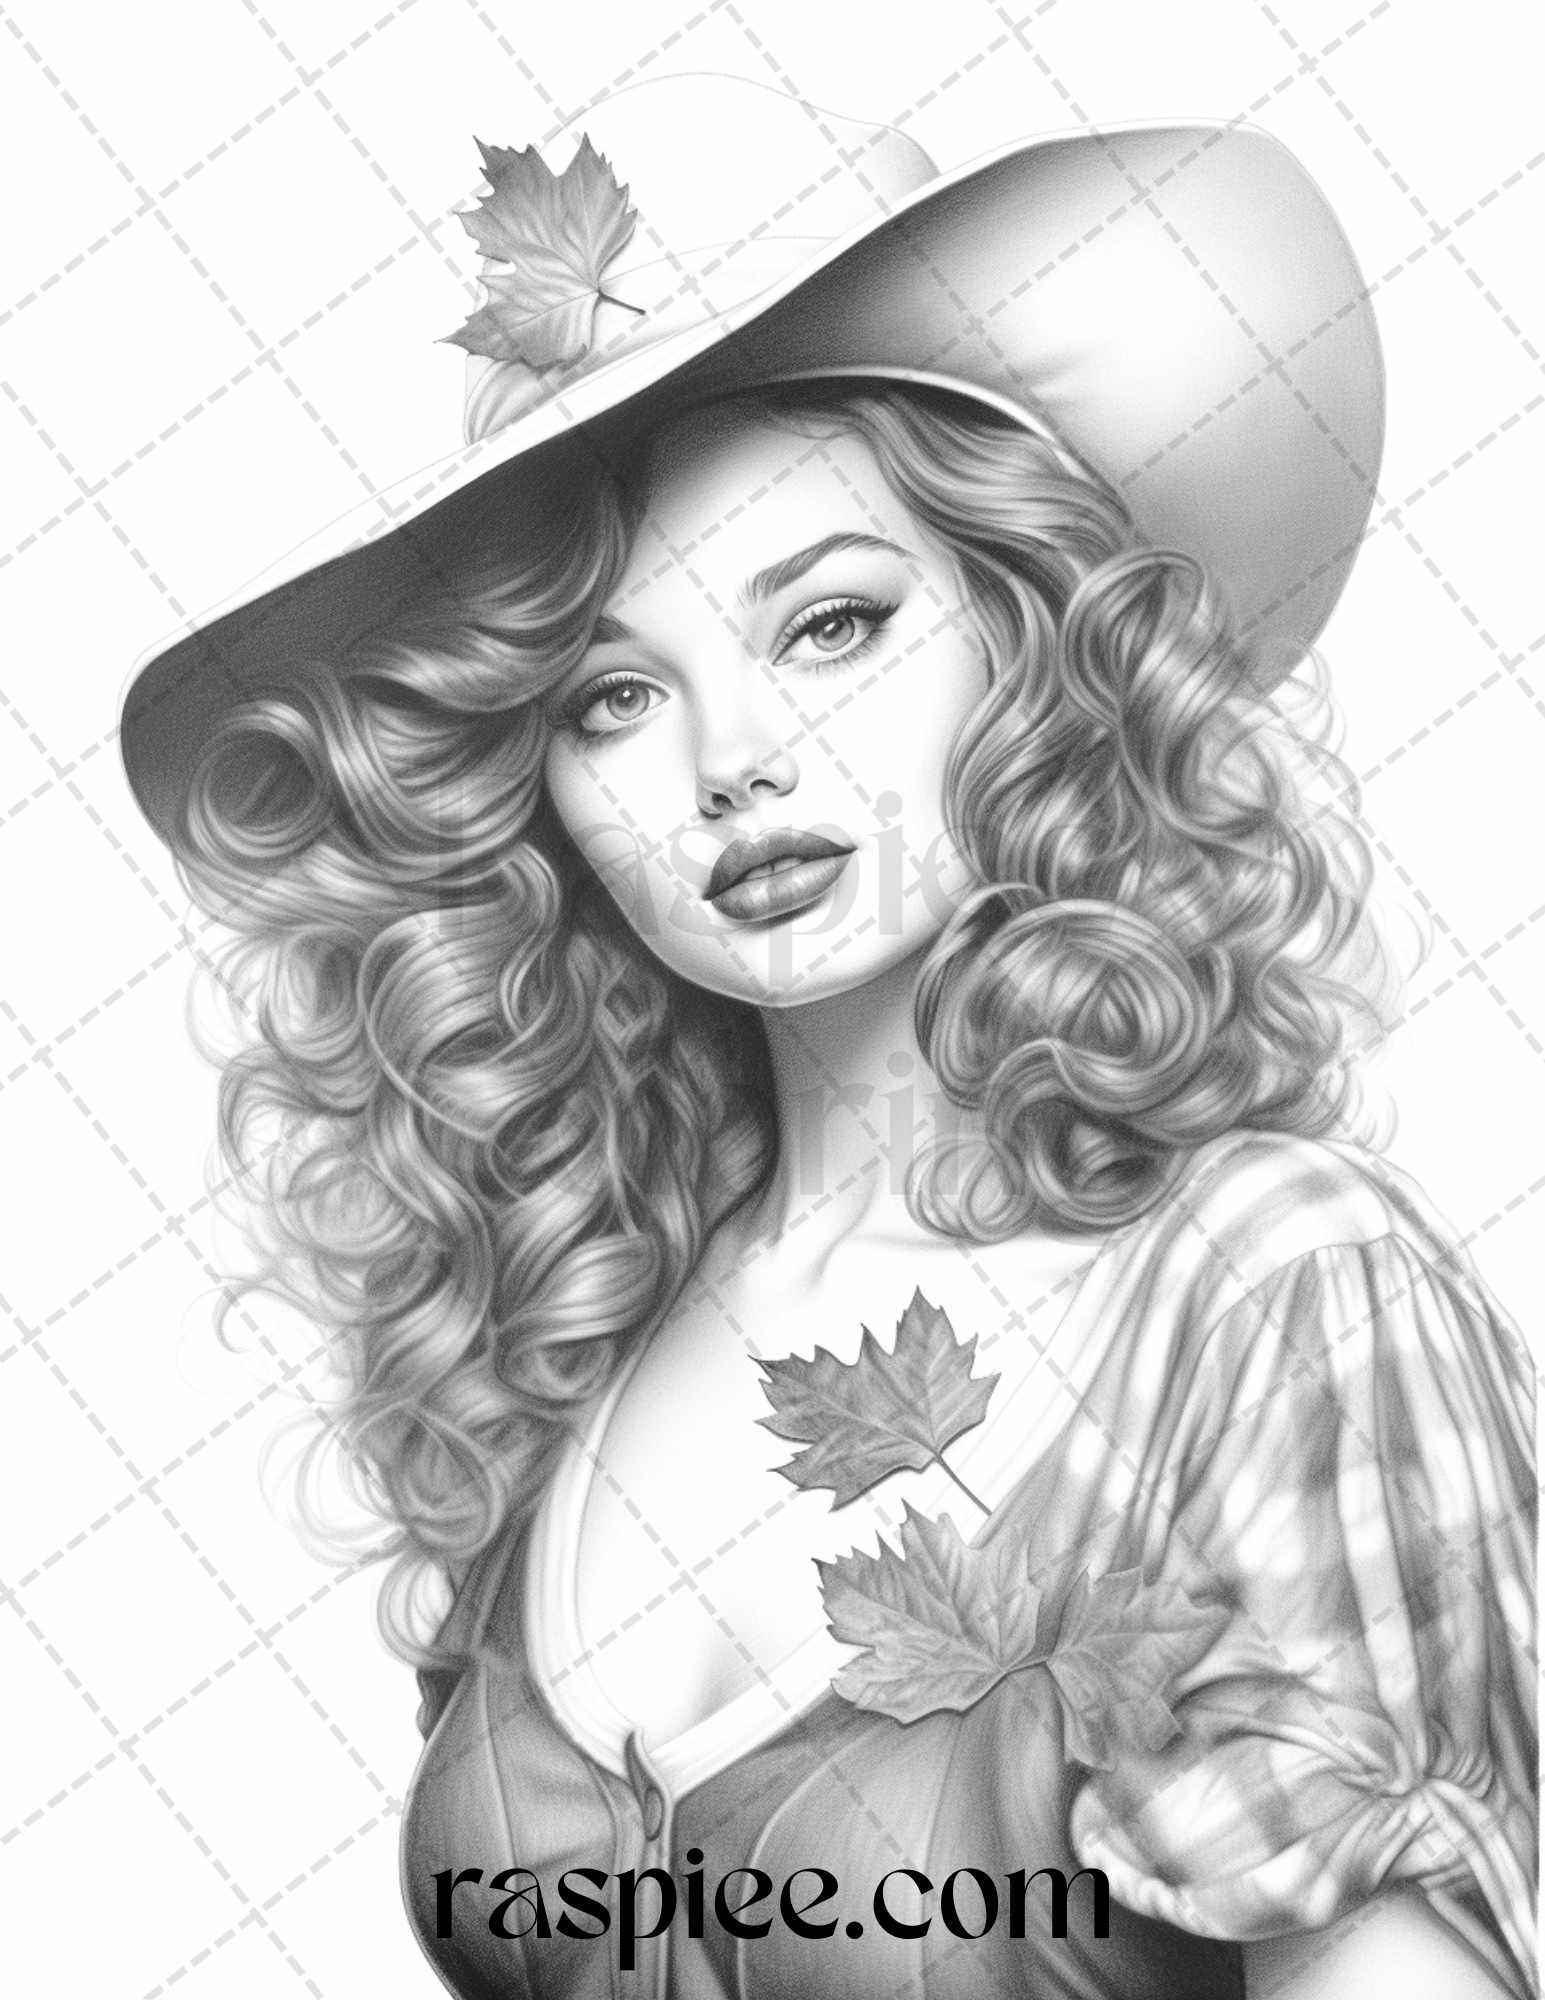 44 Animated Cover Girls Digital Coloring Book Kids Adults Pin up Girls  Designs Style Grayscale Page Instant Download Printable PDF 